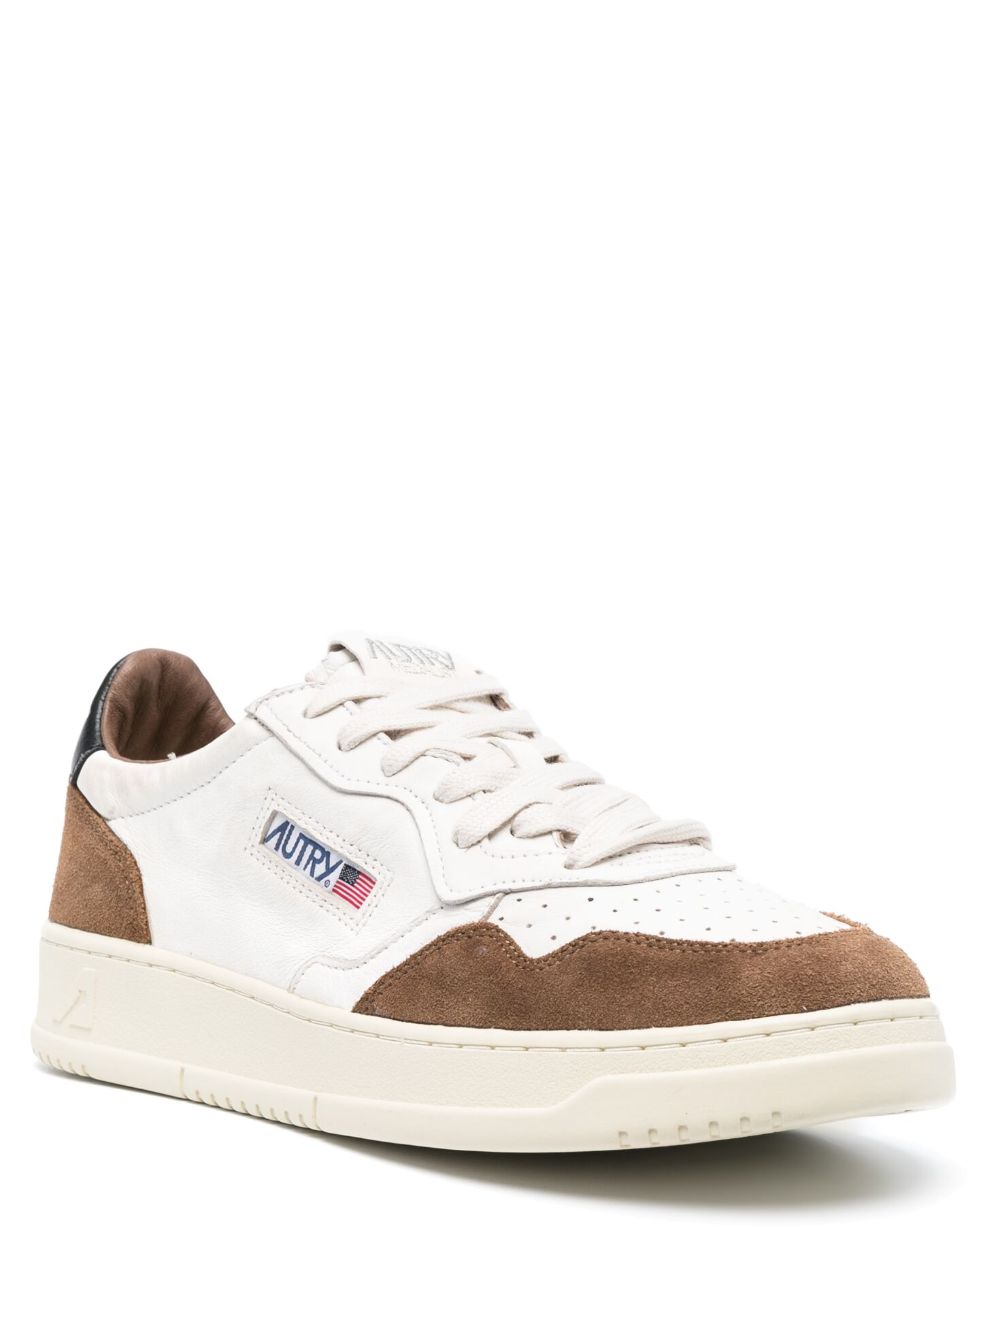 white and brown medalist sneaker